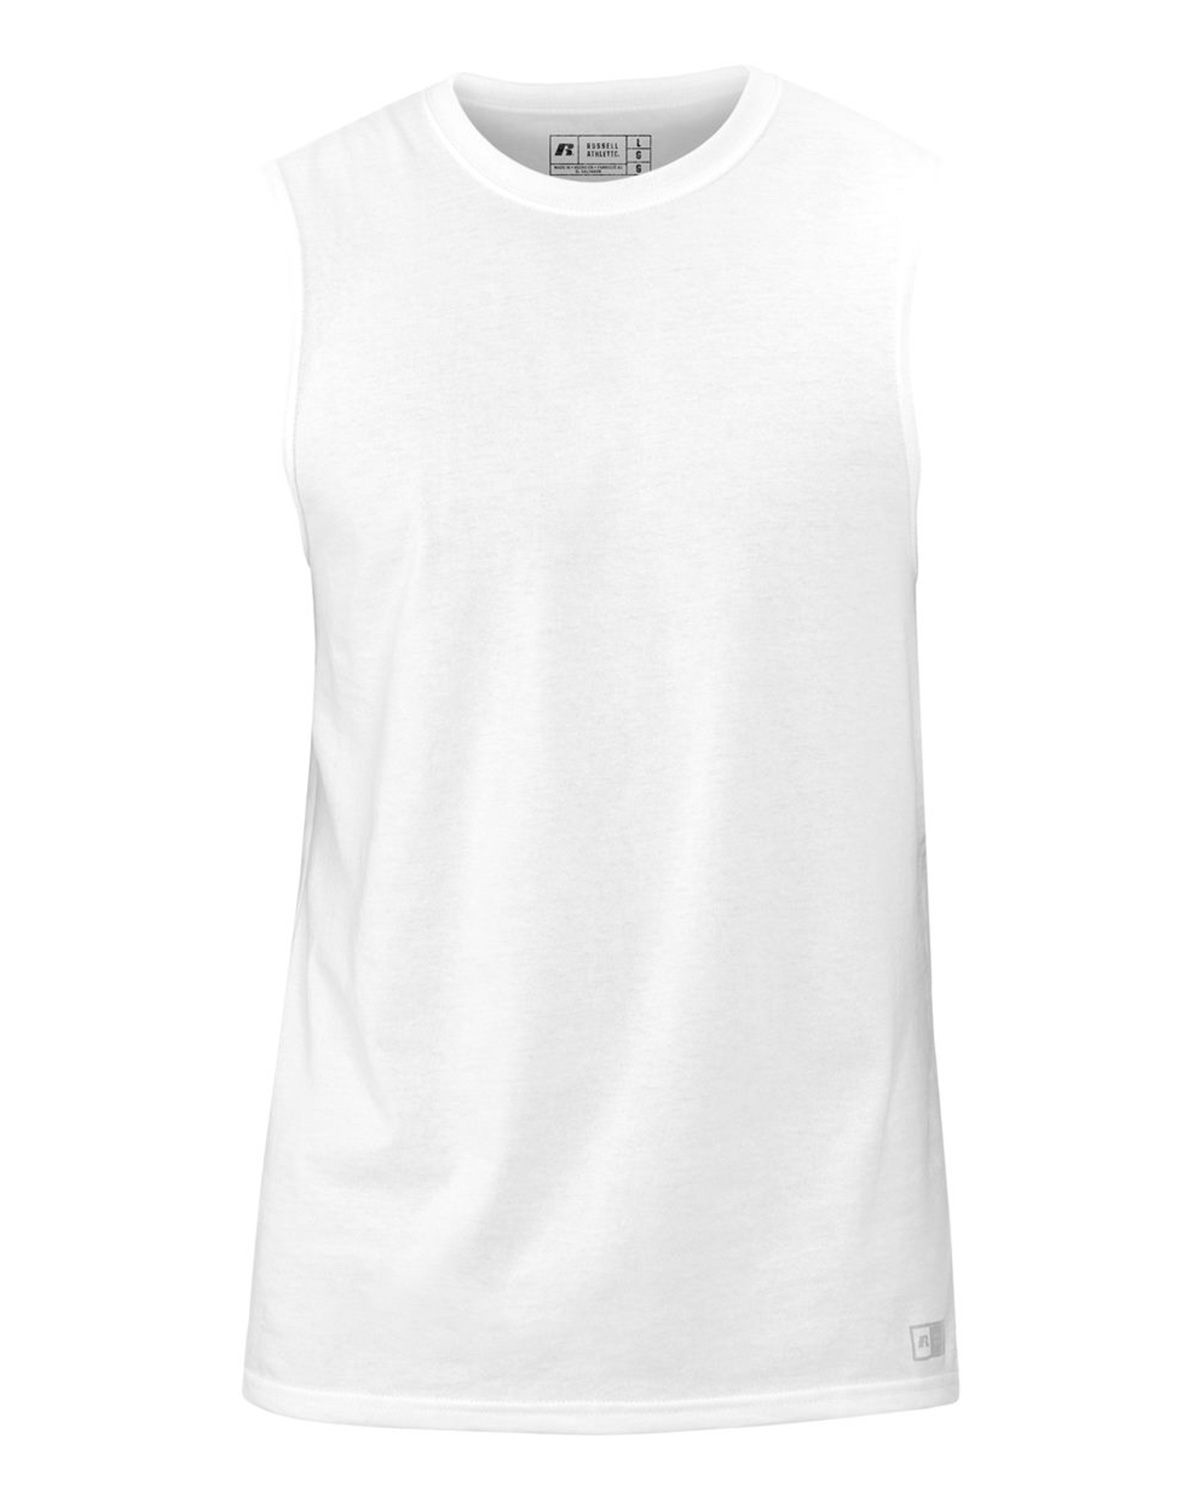 Russell Athletic 64MTTM Essential Jersey Sleeveless Muscle T-Shirt